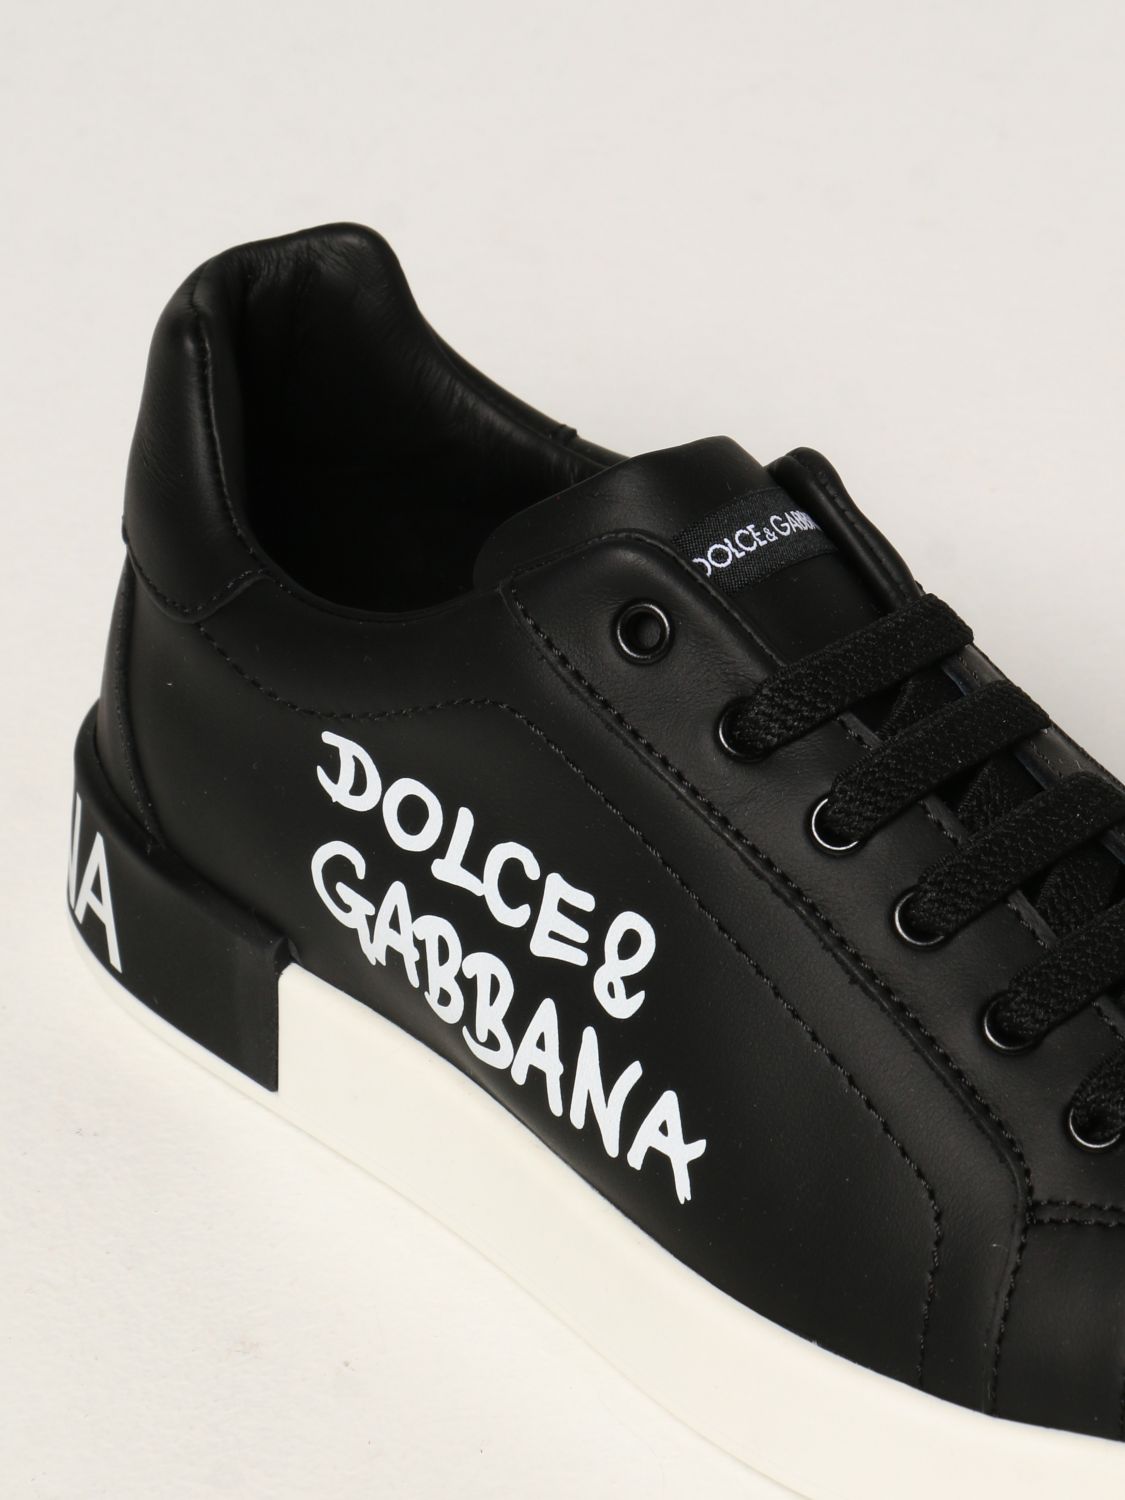 DOLCE & GABBANA sneakers in leather Black Dolce & Gabbana shoes